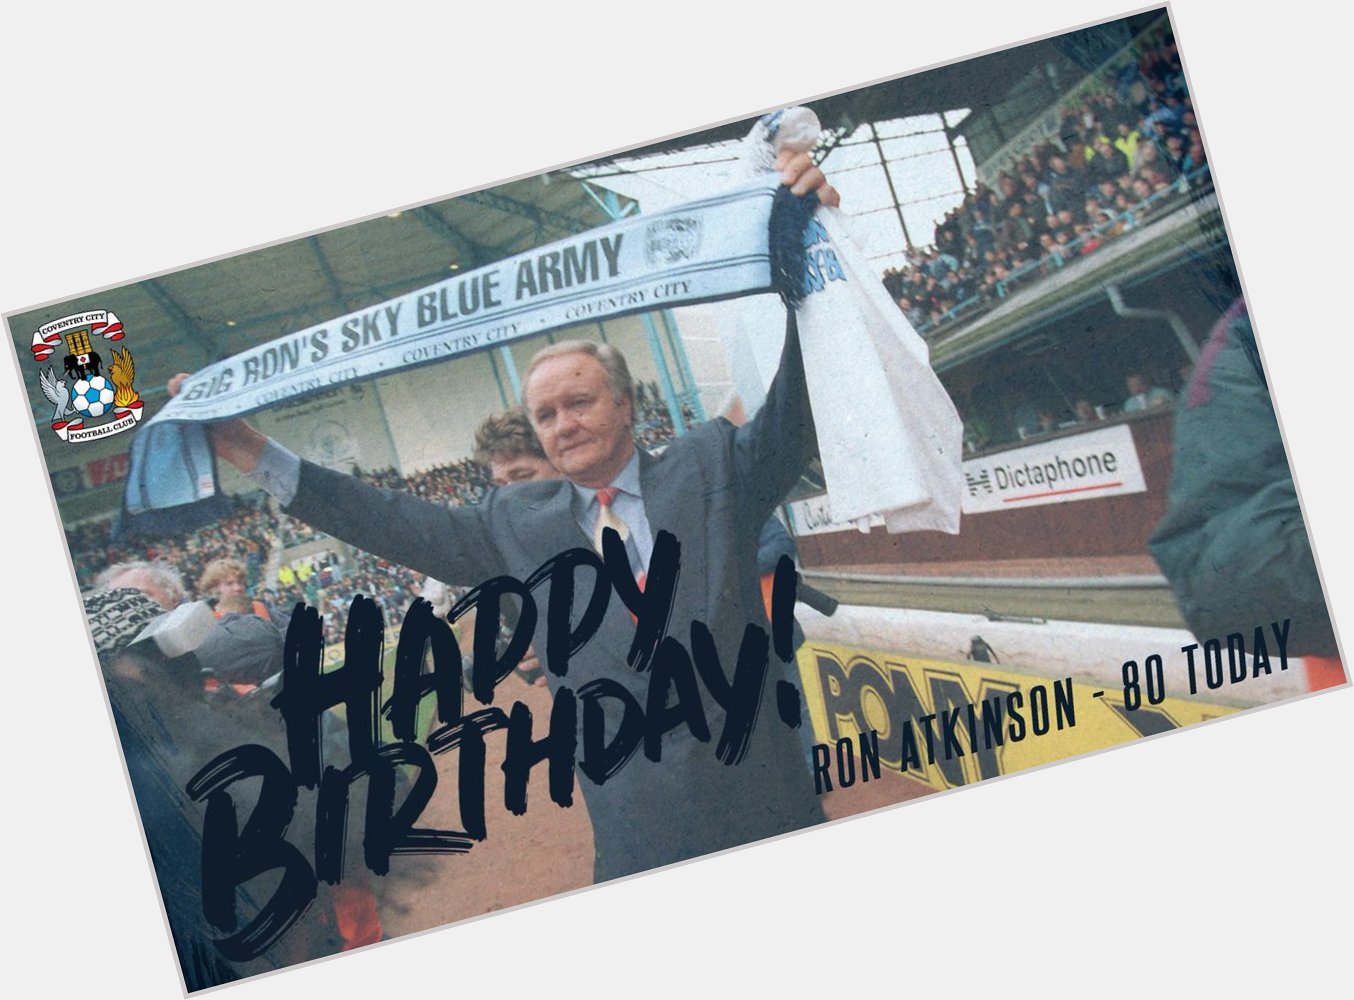  Happy Birthday to former Manager Ron Atkinson, who is 80 today. 